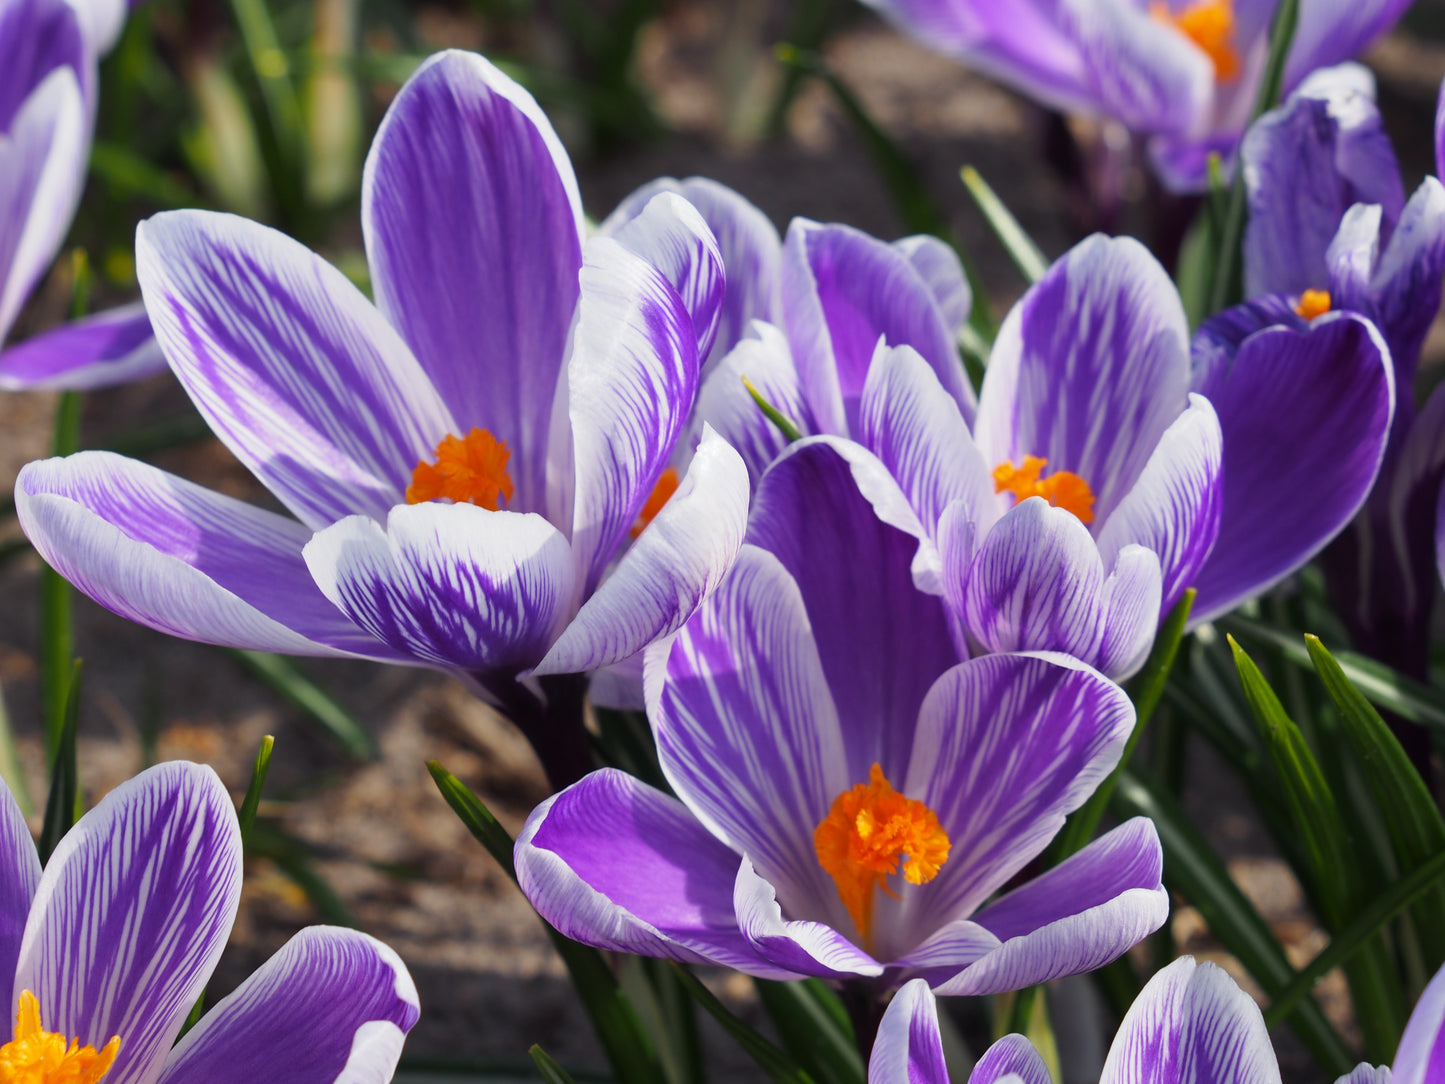 Crocus 'King of the Striped'